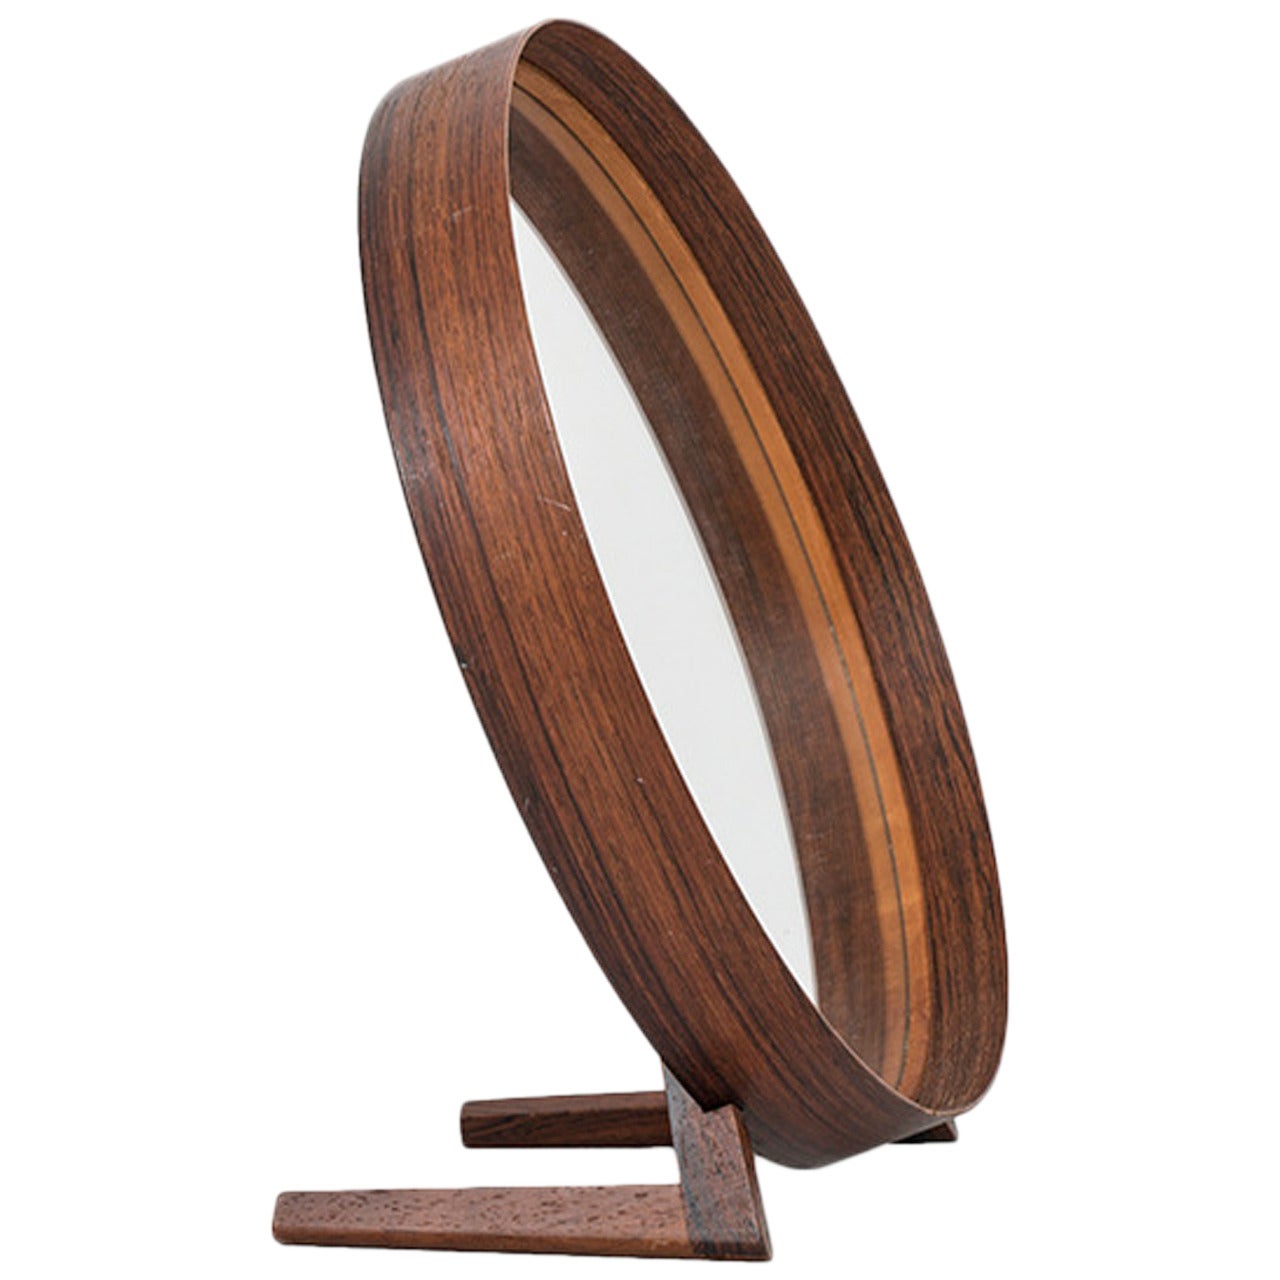 Rare Table Mirror by Uno & Östen Kristiansson, Produced by Luxus in Sweden